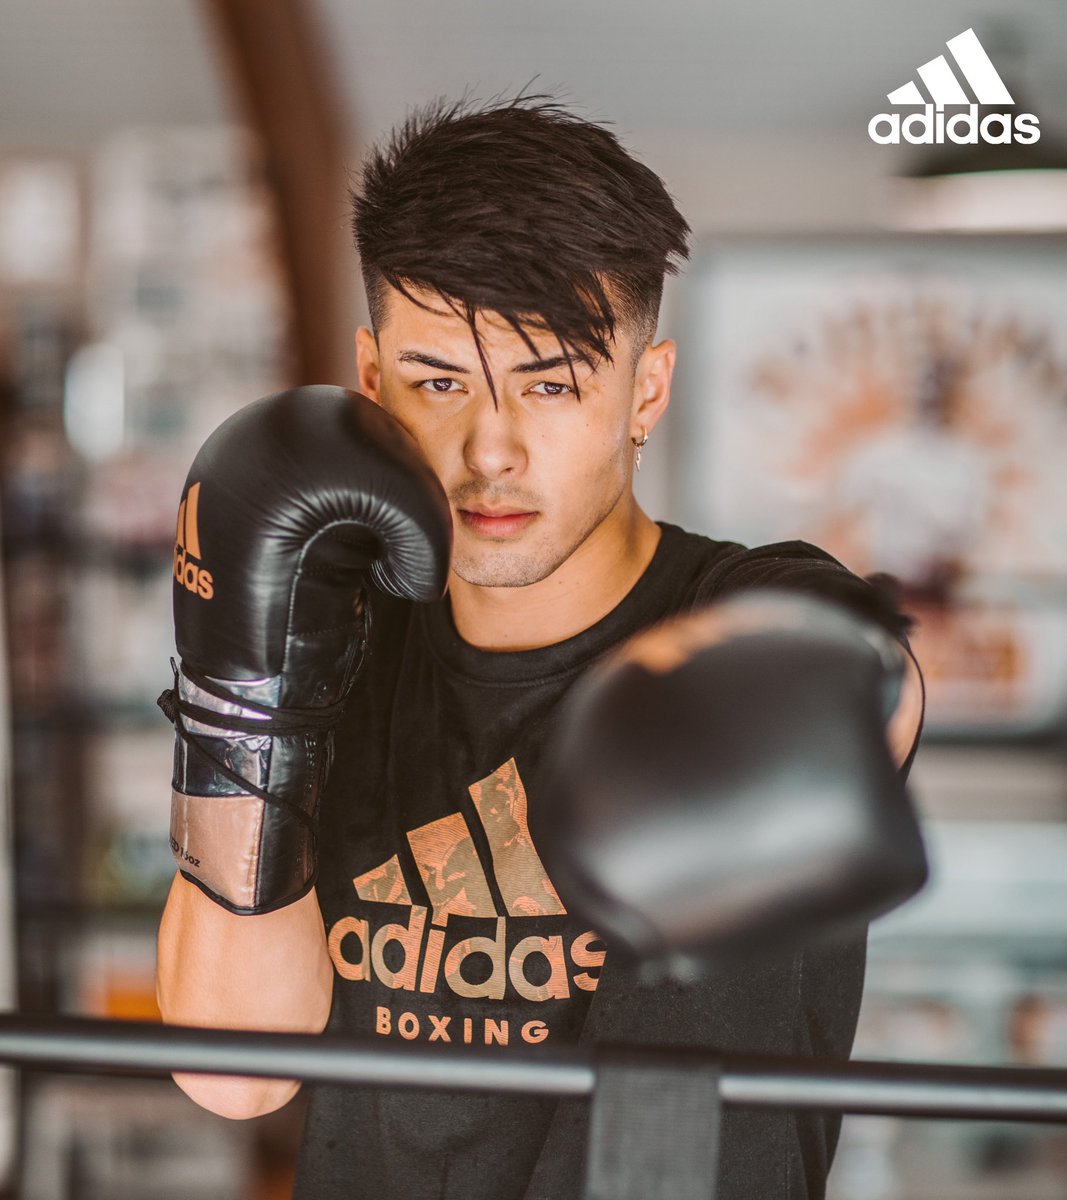 Beyond excited to announce that I have signed a contract with Adidas to be an official Adidas Boxing athlete !! Very grateful for this opportunity and for those of you who have been riding with me. Let’s get it 🤘🏻
#adidas #adidasboxing #fastisfeared